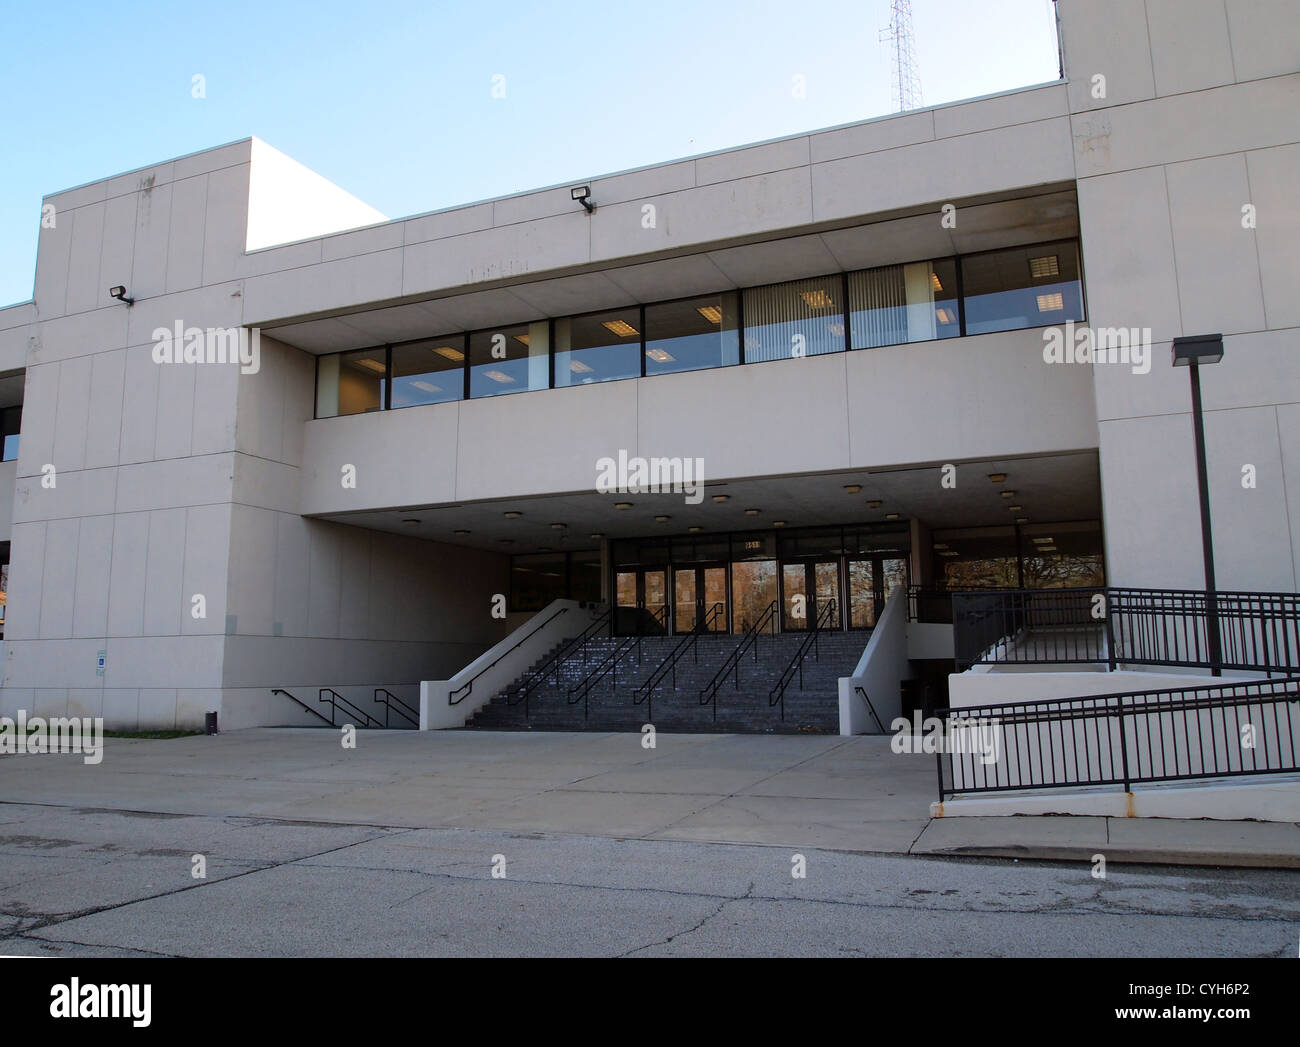 Illinois State Police headquarters, previously the Maine North High School, used in the 80's movie The Breakfast Club. Stock Photo